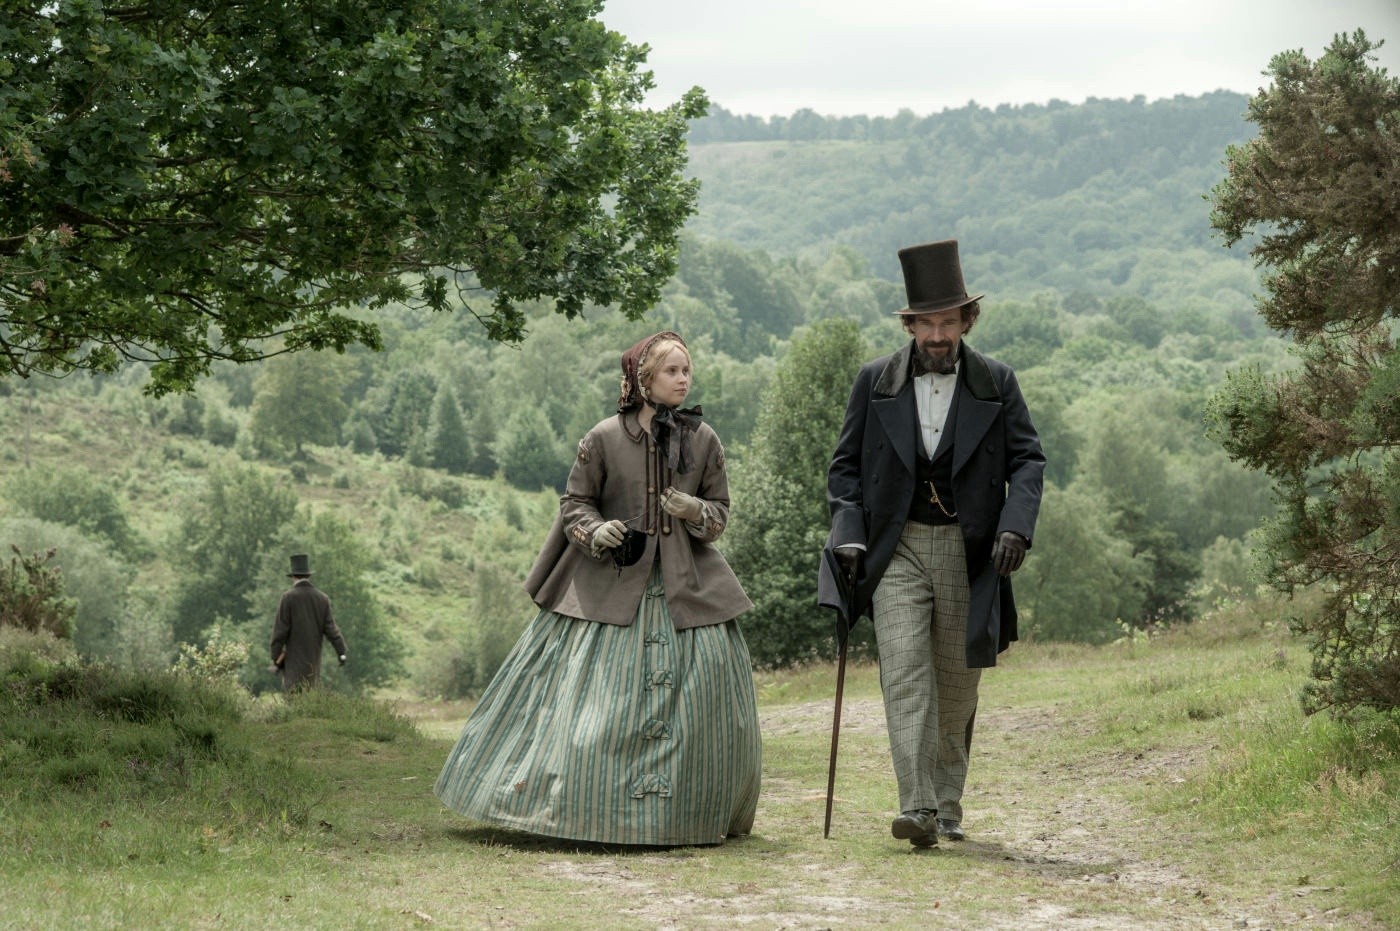 Felicity Jones stars as Nelly Ternan and Ralph Fiennes stars as Charles Dickens in Sony Pictures Classics' The Invisible Woman (2013). Photo credit by David Appleby.